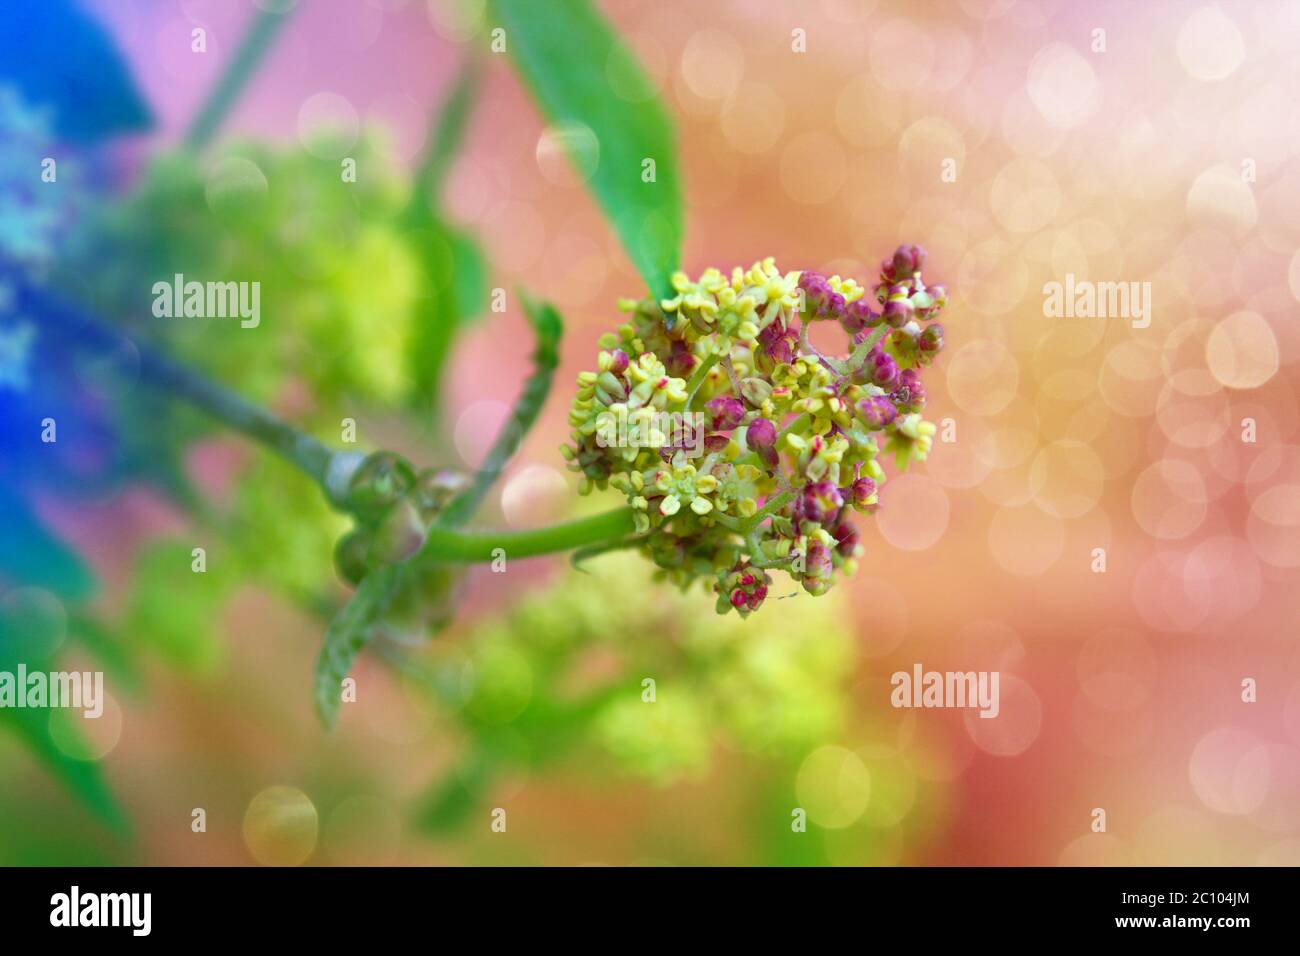 Blooming barberry branch on a bright colored background Stock Photo